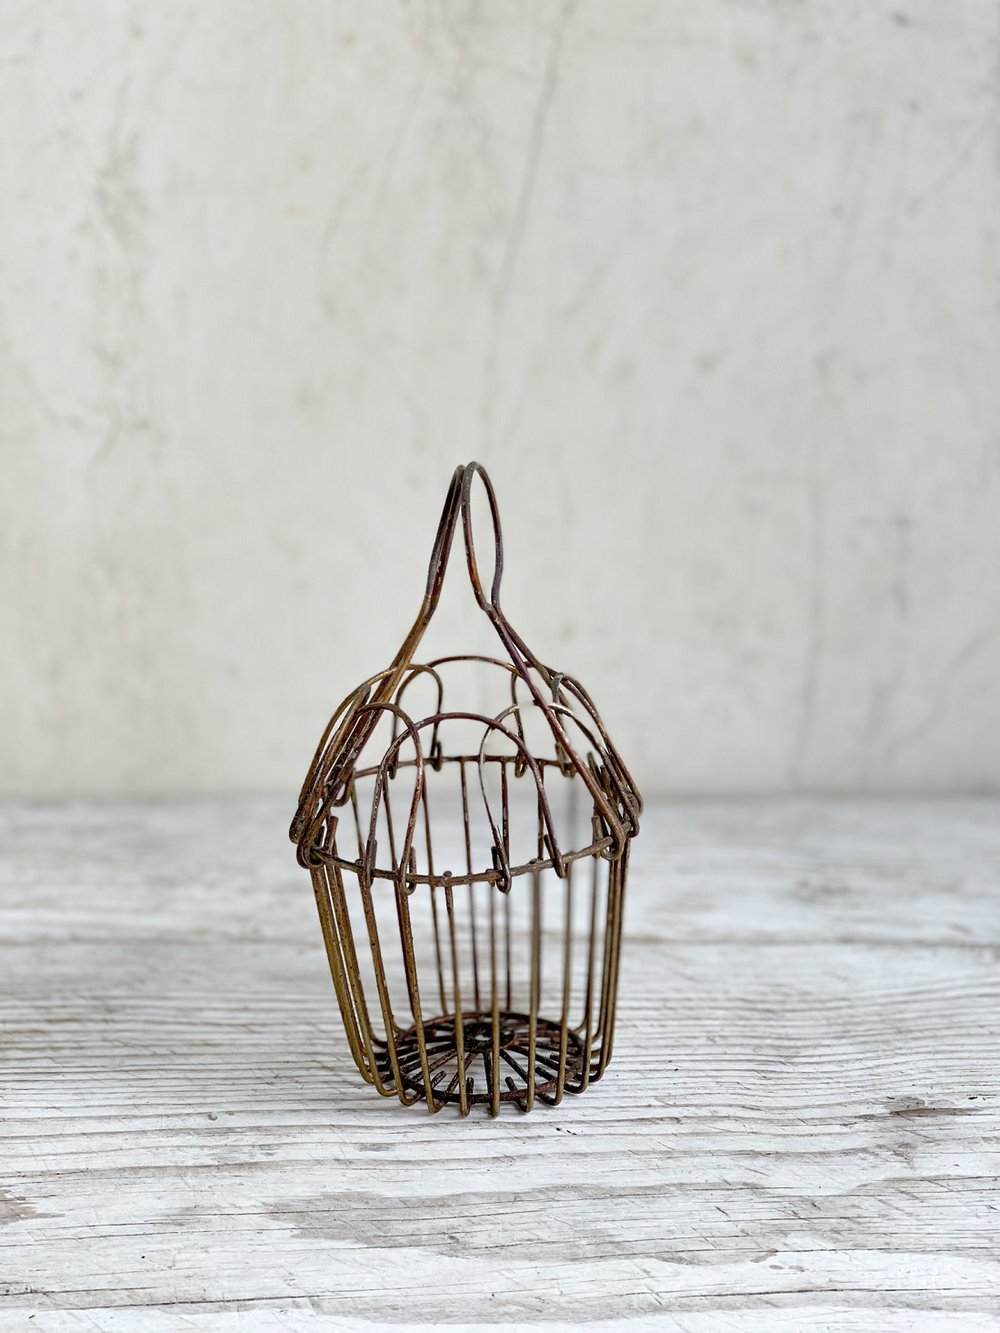 Old Metal Wire Basket Collapsible Eggs Fruit Storage Fishing 